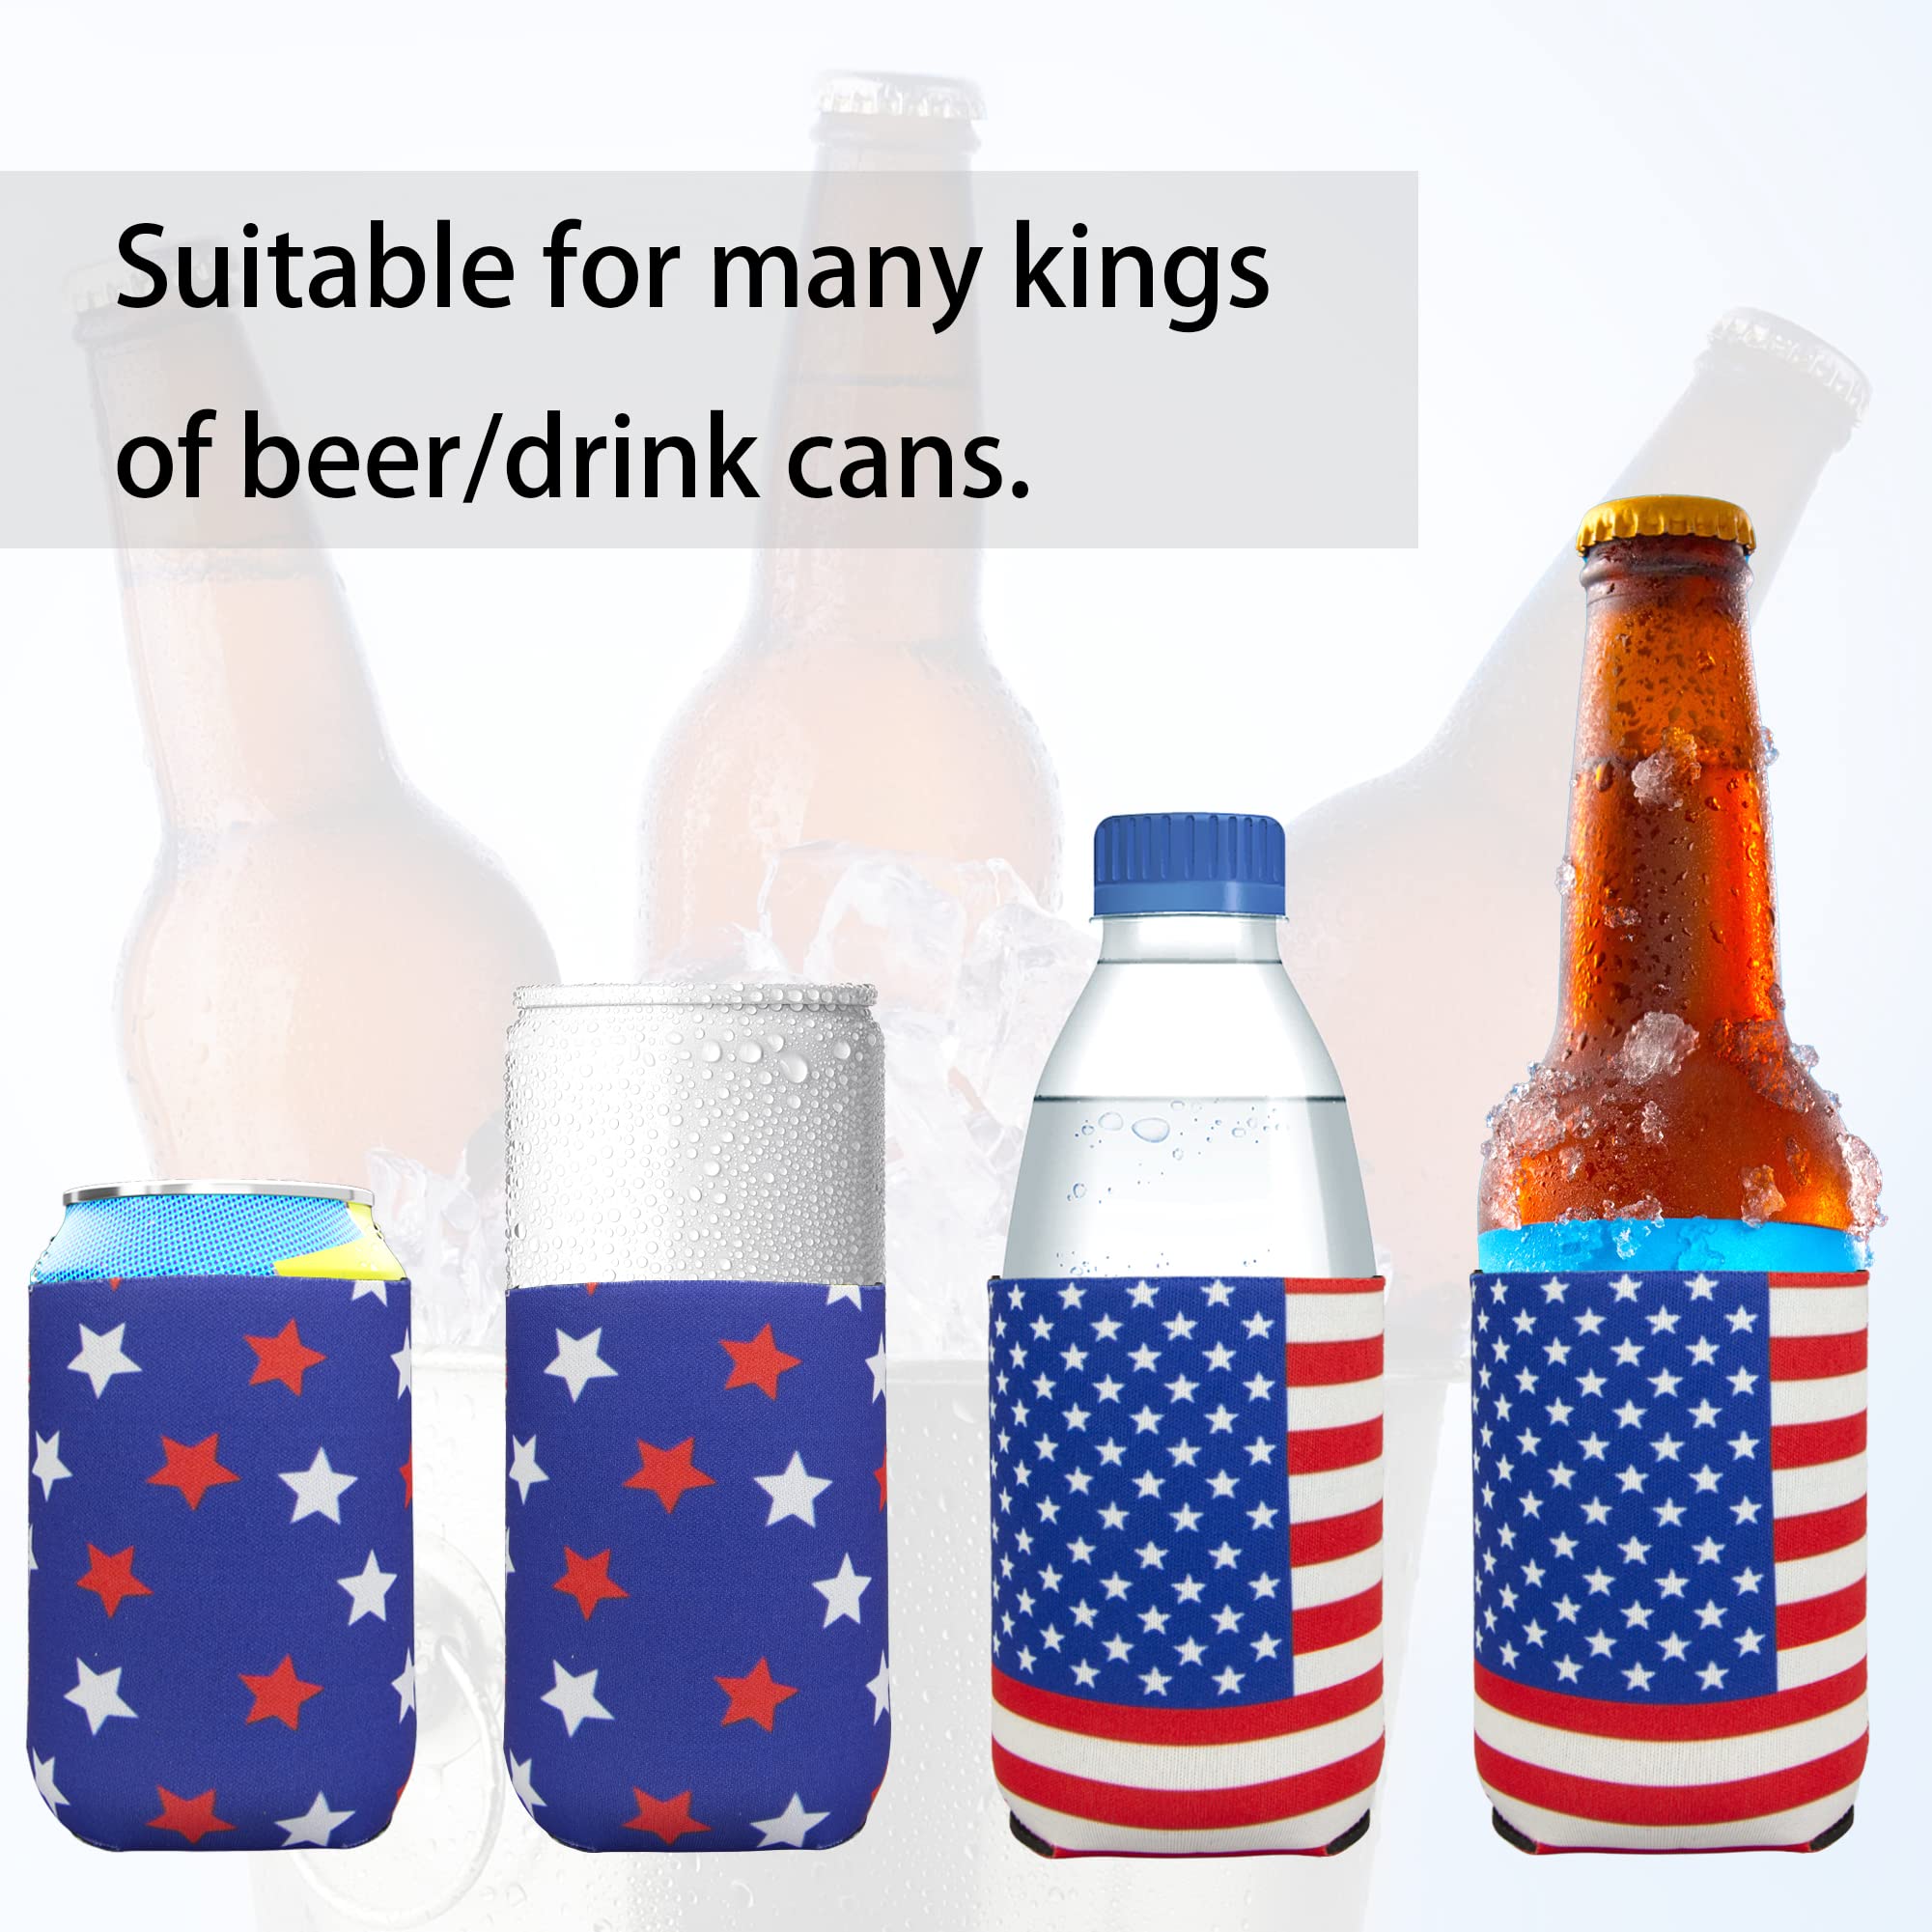 12 PCS Can Cooler Sleeves - American Flag Soda Beer Drink Coolies - Insulated Collapsible Cooler Holder to Glass or Bottle for American Independence Day, National Day (USA Flag Horizontal + Star Blue)